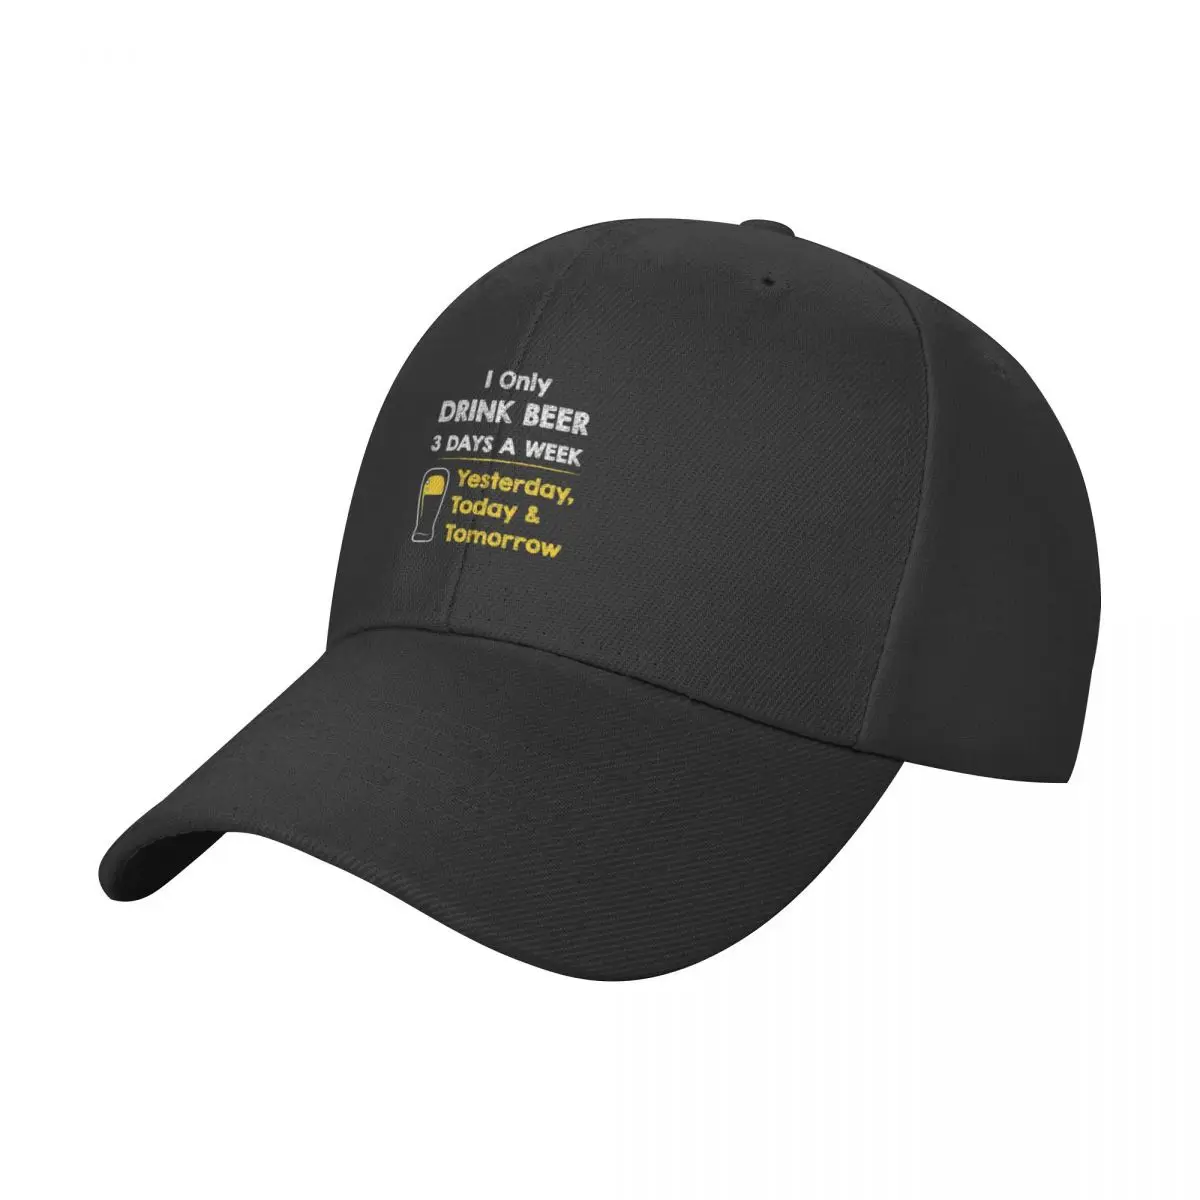 

I Only Drink Beer 3 Days A Week Baseball Cap beach hat cute Rugby birthday For Men Women's